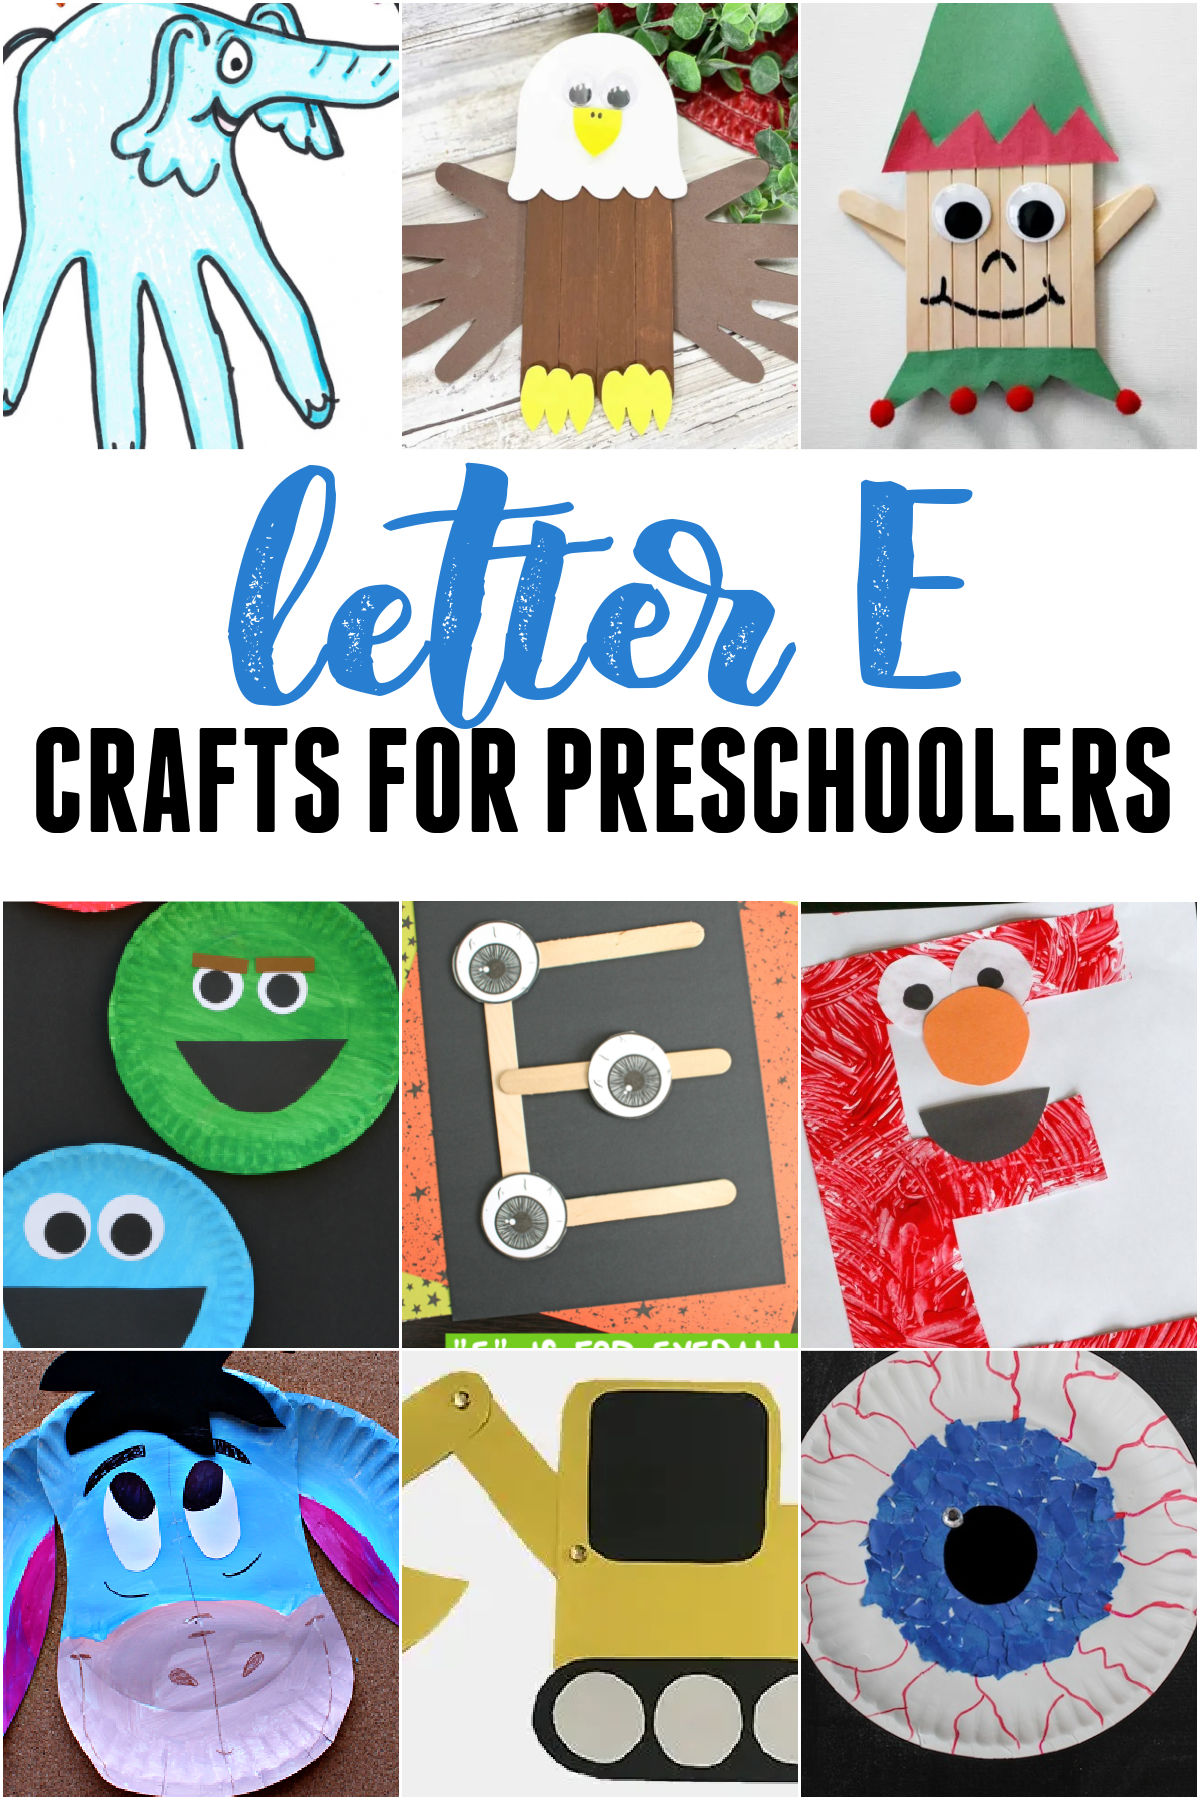 Collage of Letter E Crafts for Preschoolers